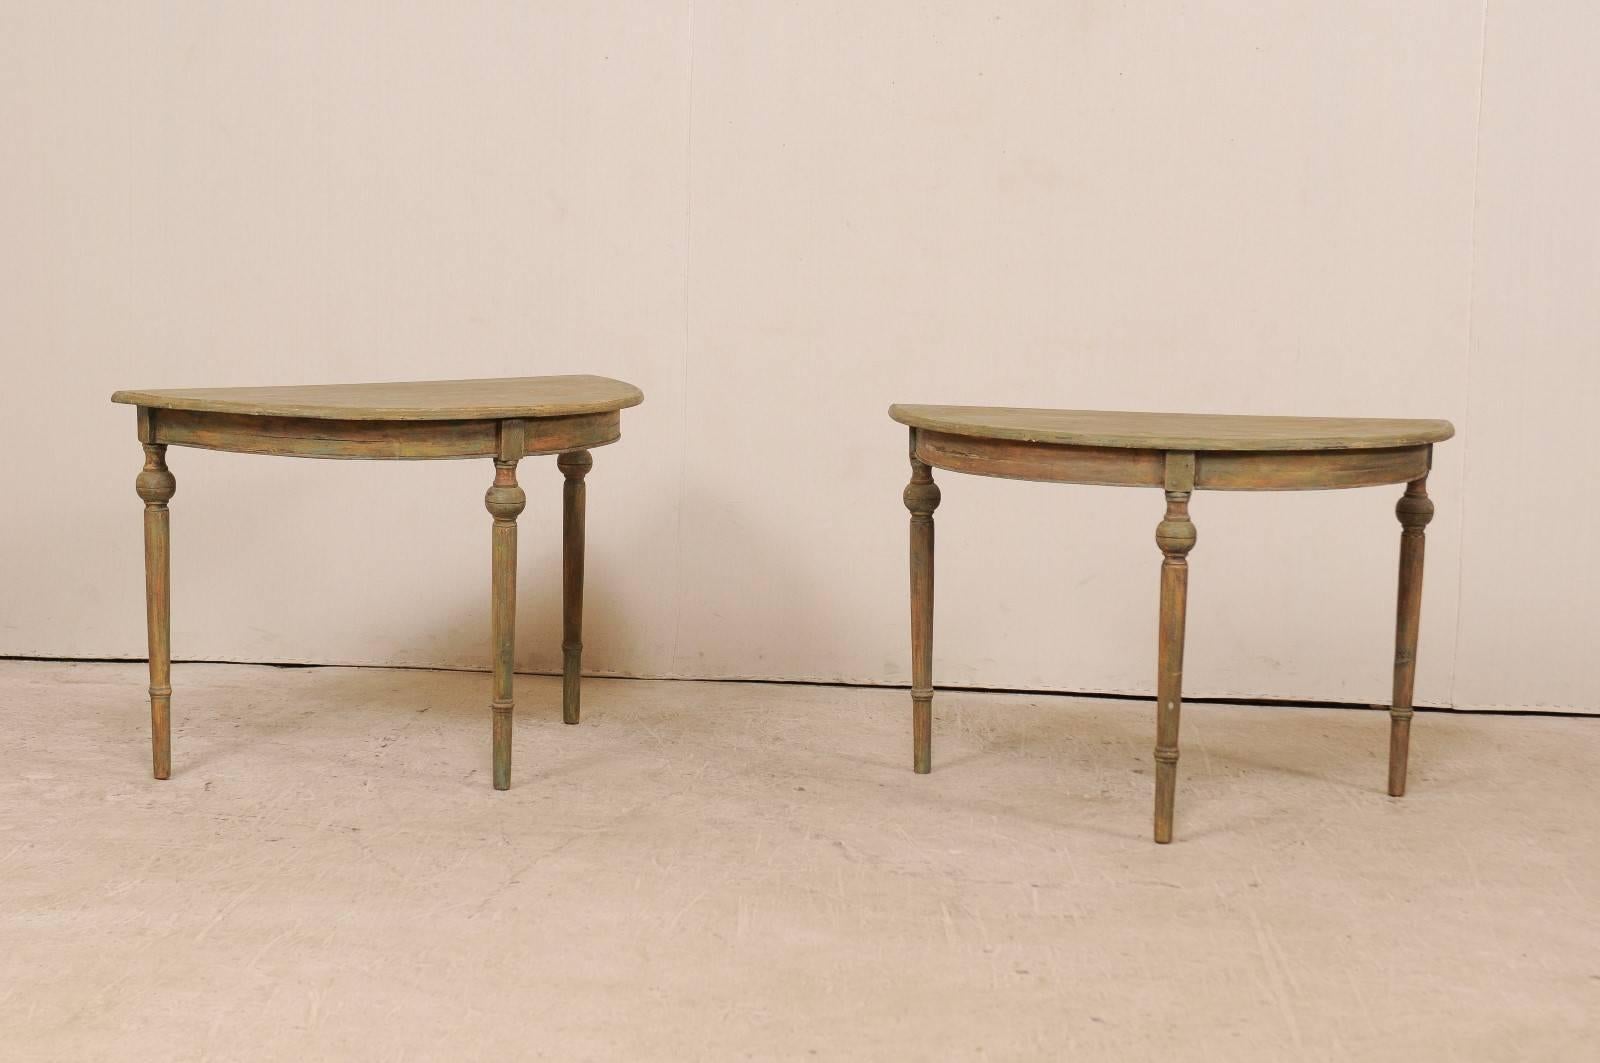 A pair of 19th century Swedish demilune tables. This pair of antique Swedish painted wood demilune tables features half moon tops over rounded aprons. The pair is raised on beautifully turned legs with a more bulbous accent near their tops. These